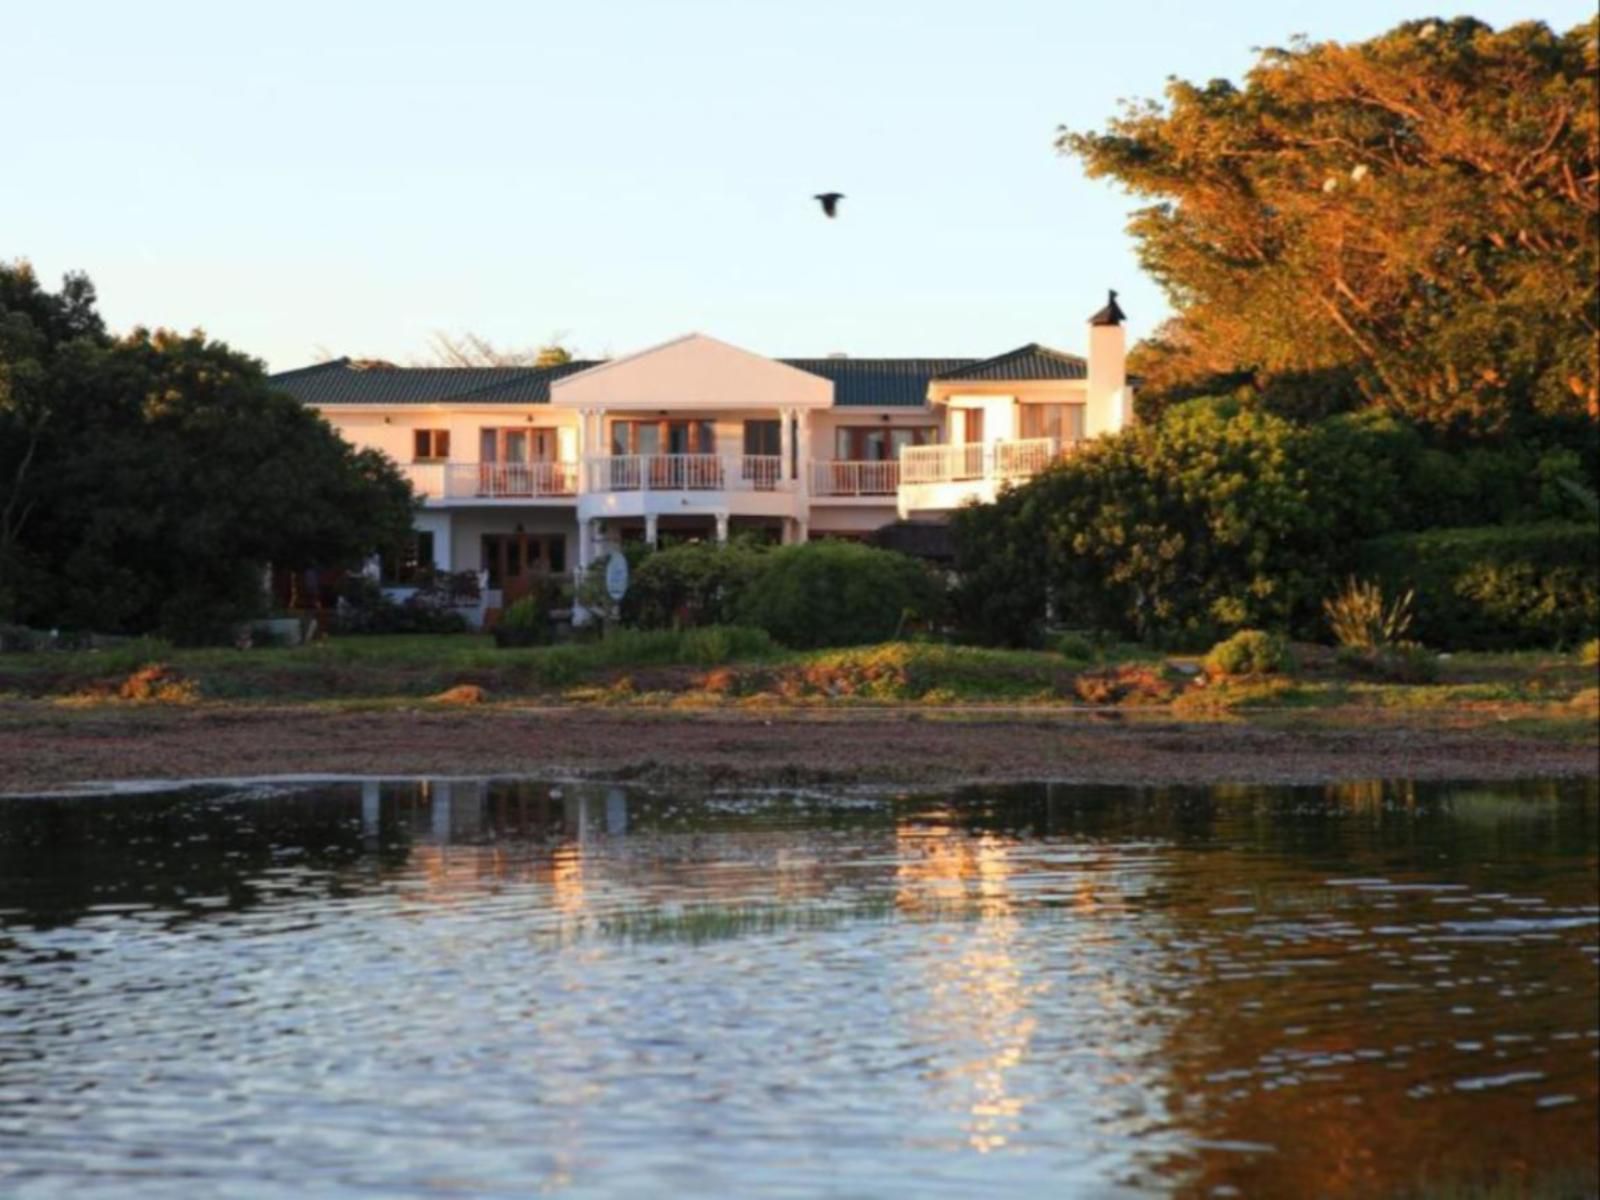 Waterfront Lodge The Point Knysna Western Cape South Africa House, Building, Architecture, River, Nature, Waters